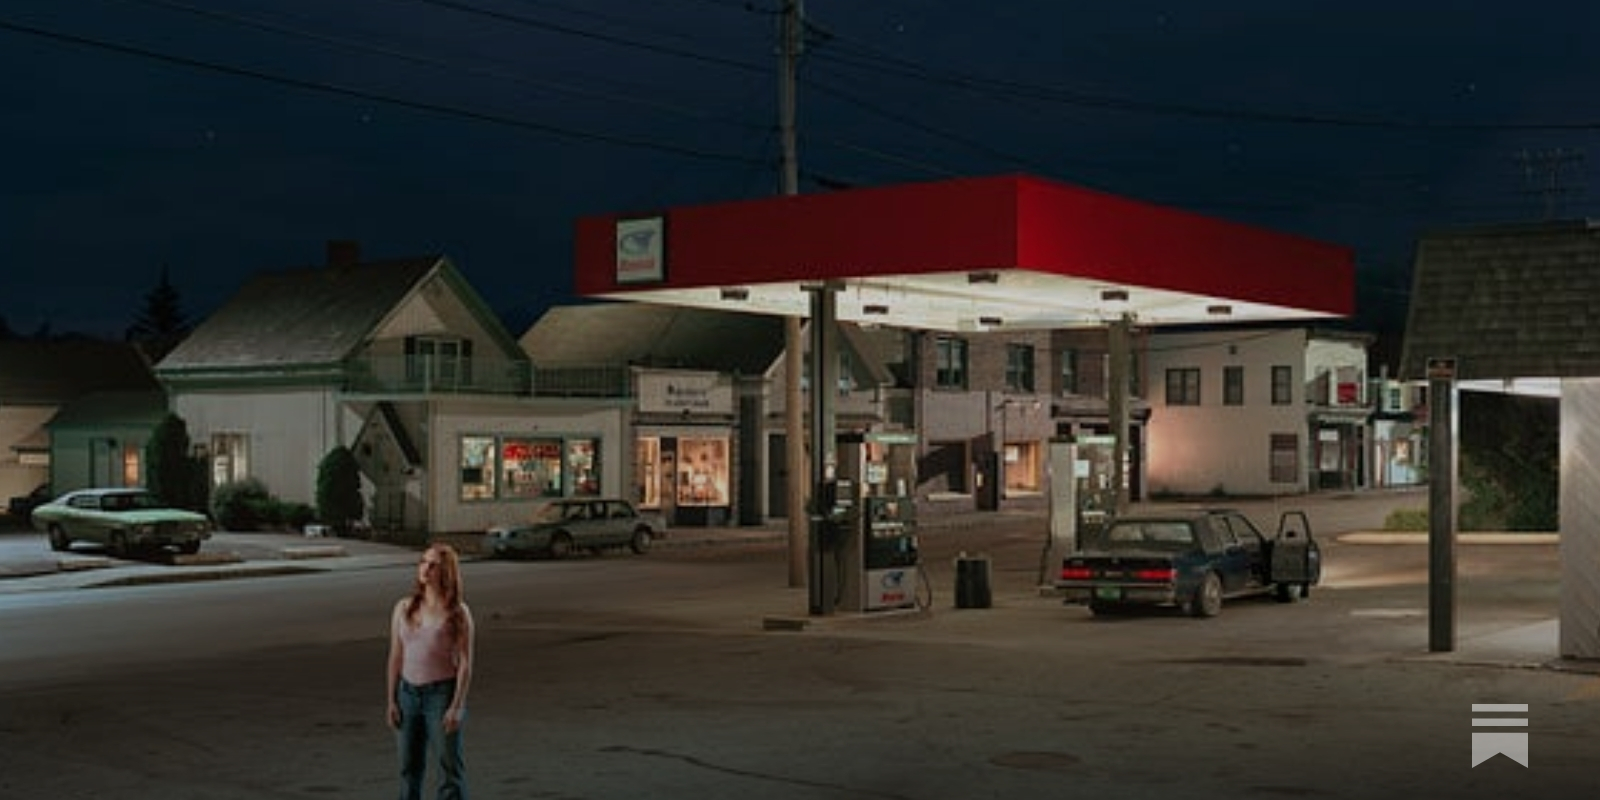 A Picture 20 Years in the Making - by Gregory Crewdson